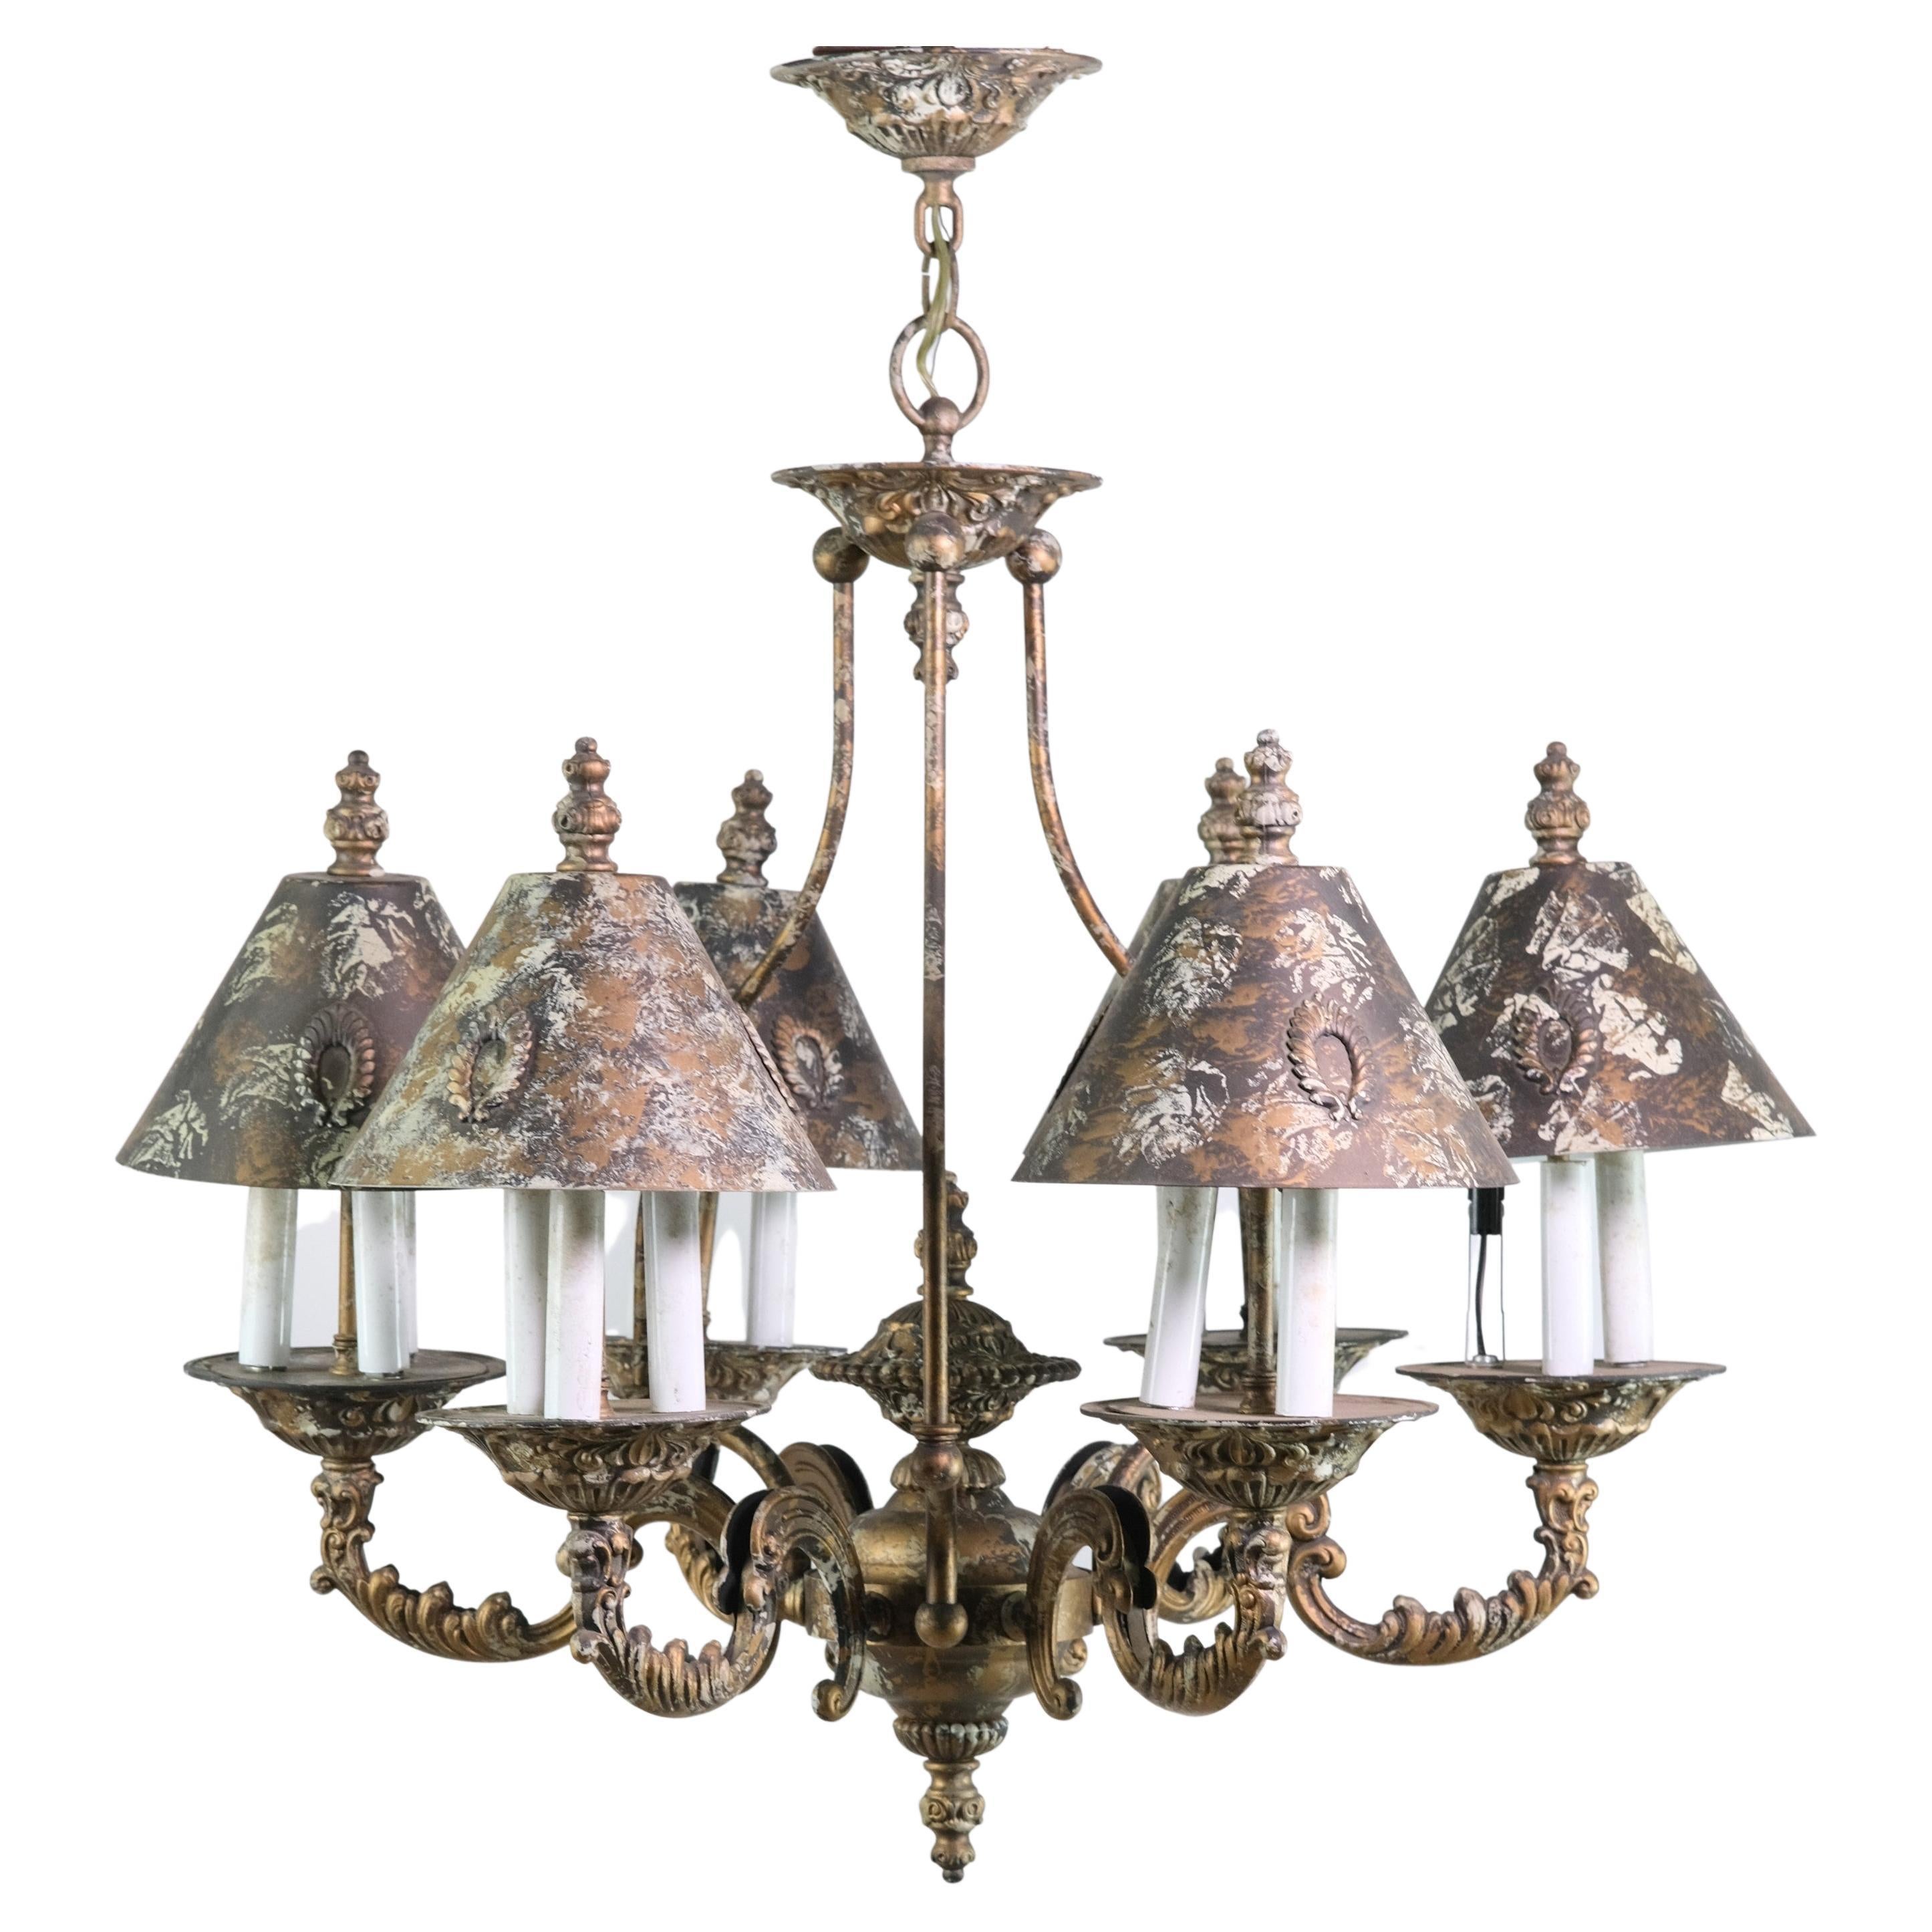 Tudor Style Bronze Chandelier w Shades 6 Arms 18 Lights